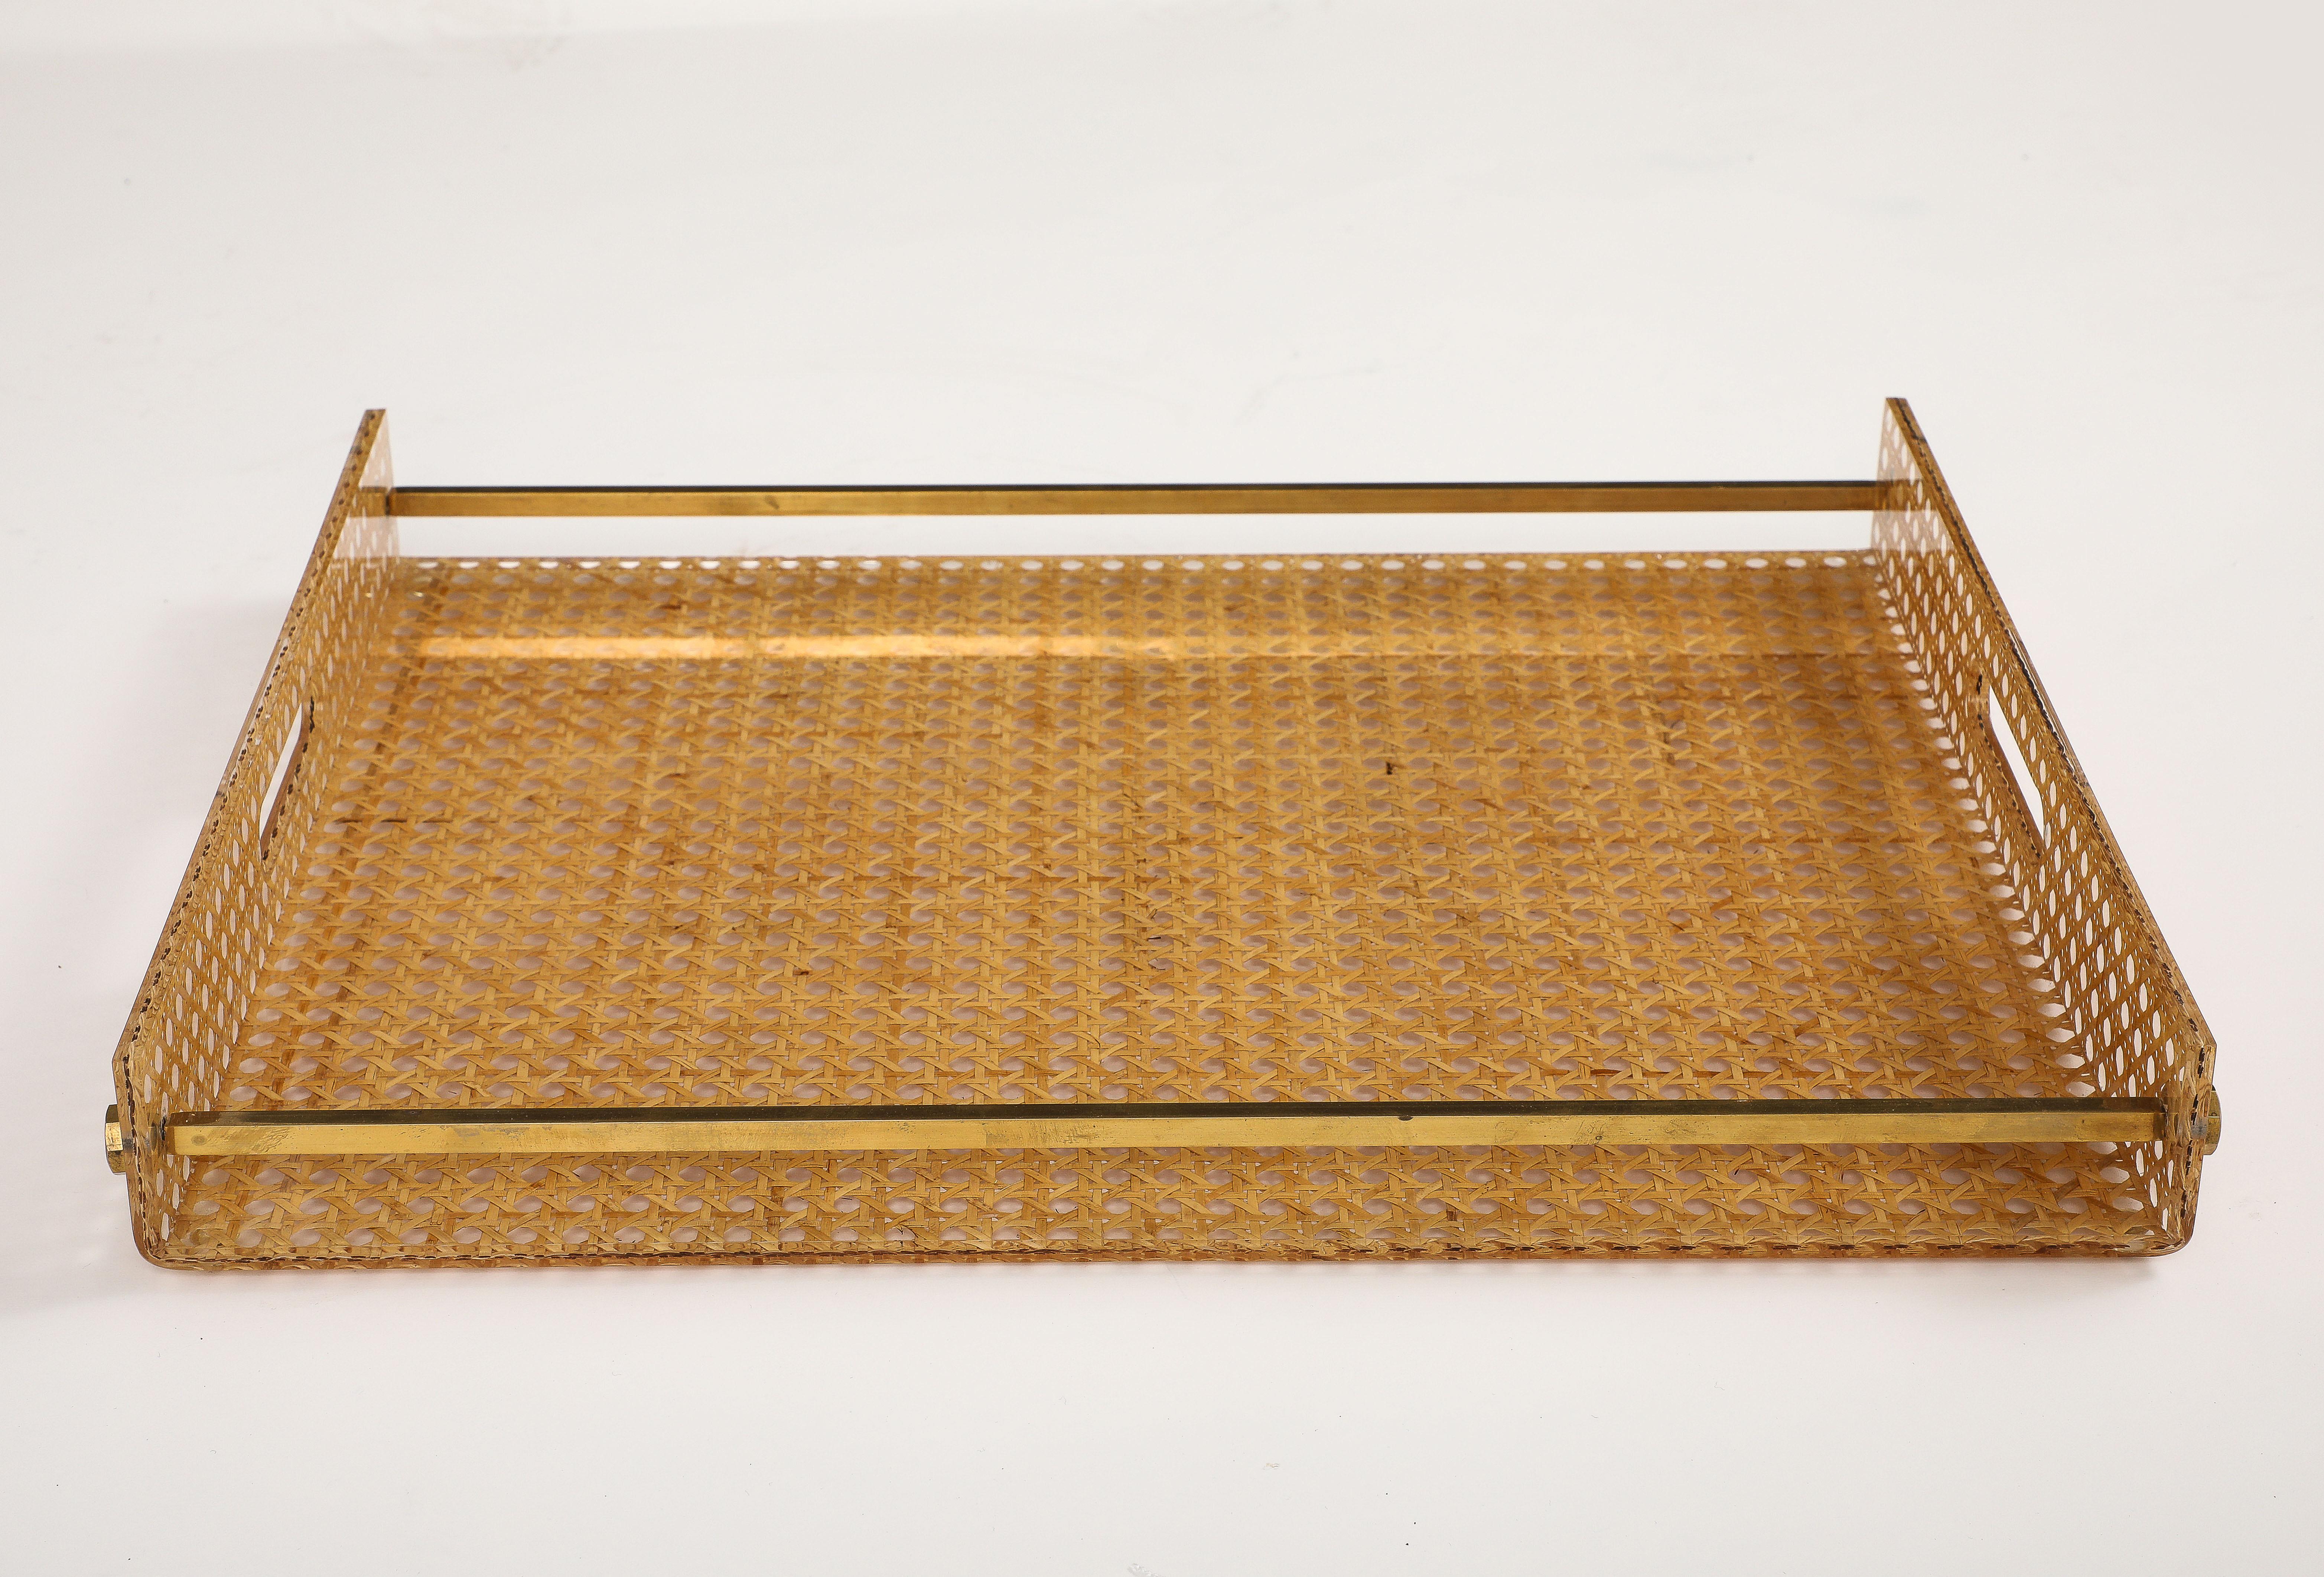 Dior Home Cane, Plexi and Brass Serving Tray

Great for Entry, Coffee Table, Bedroom, Kitchen